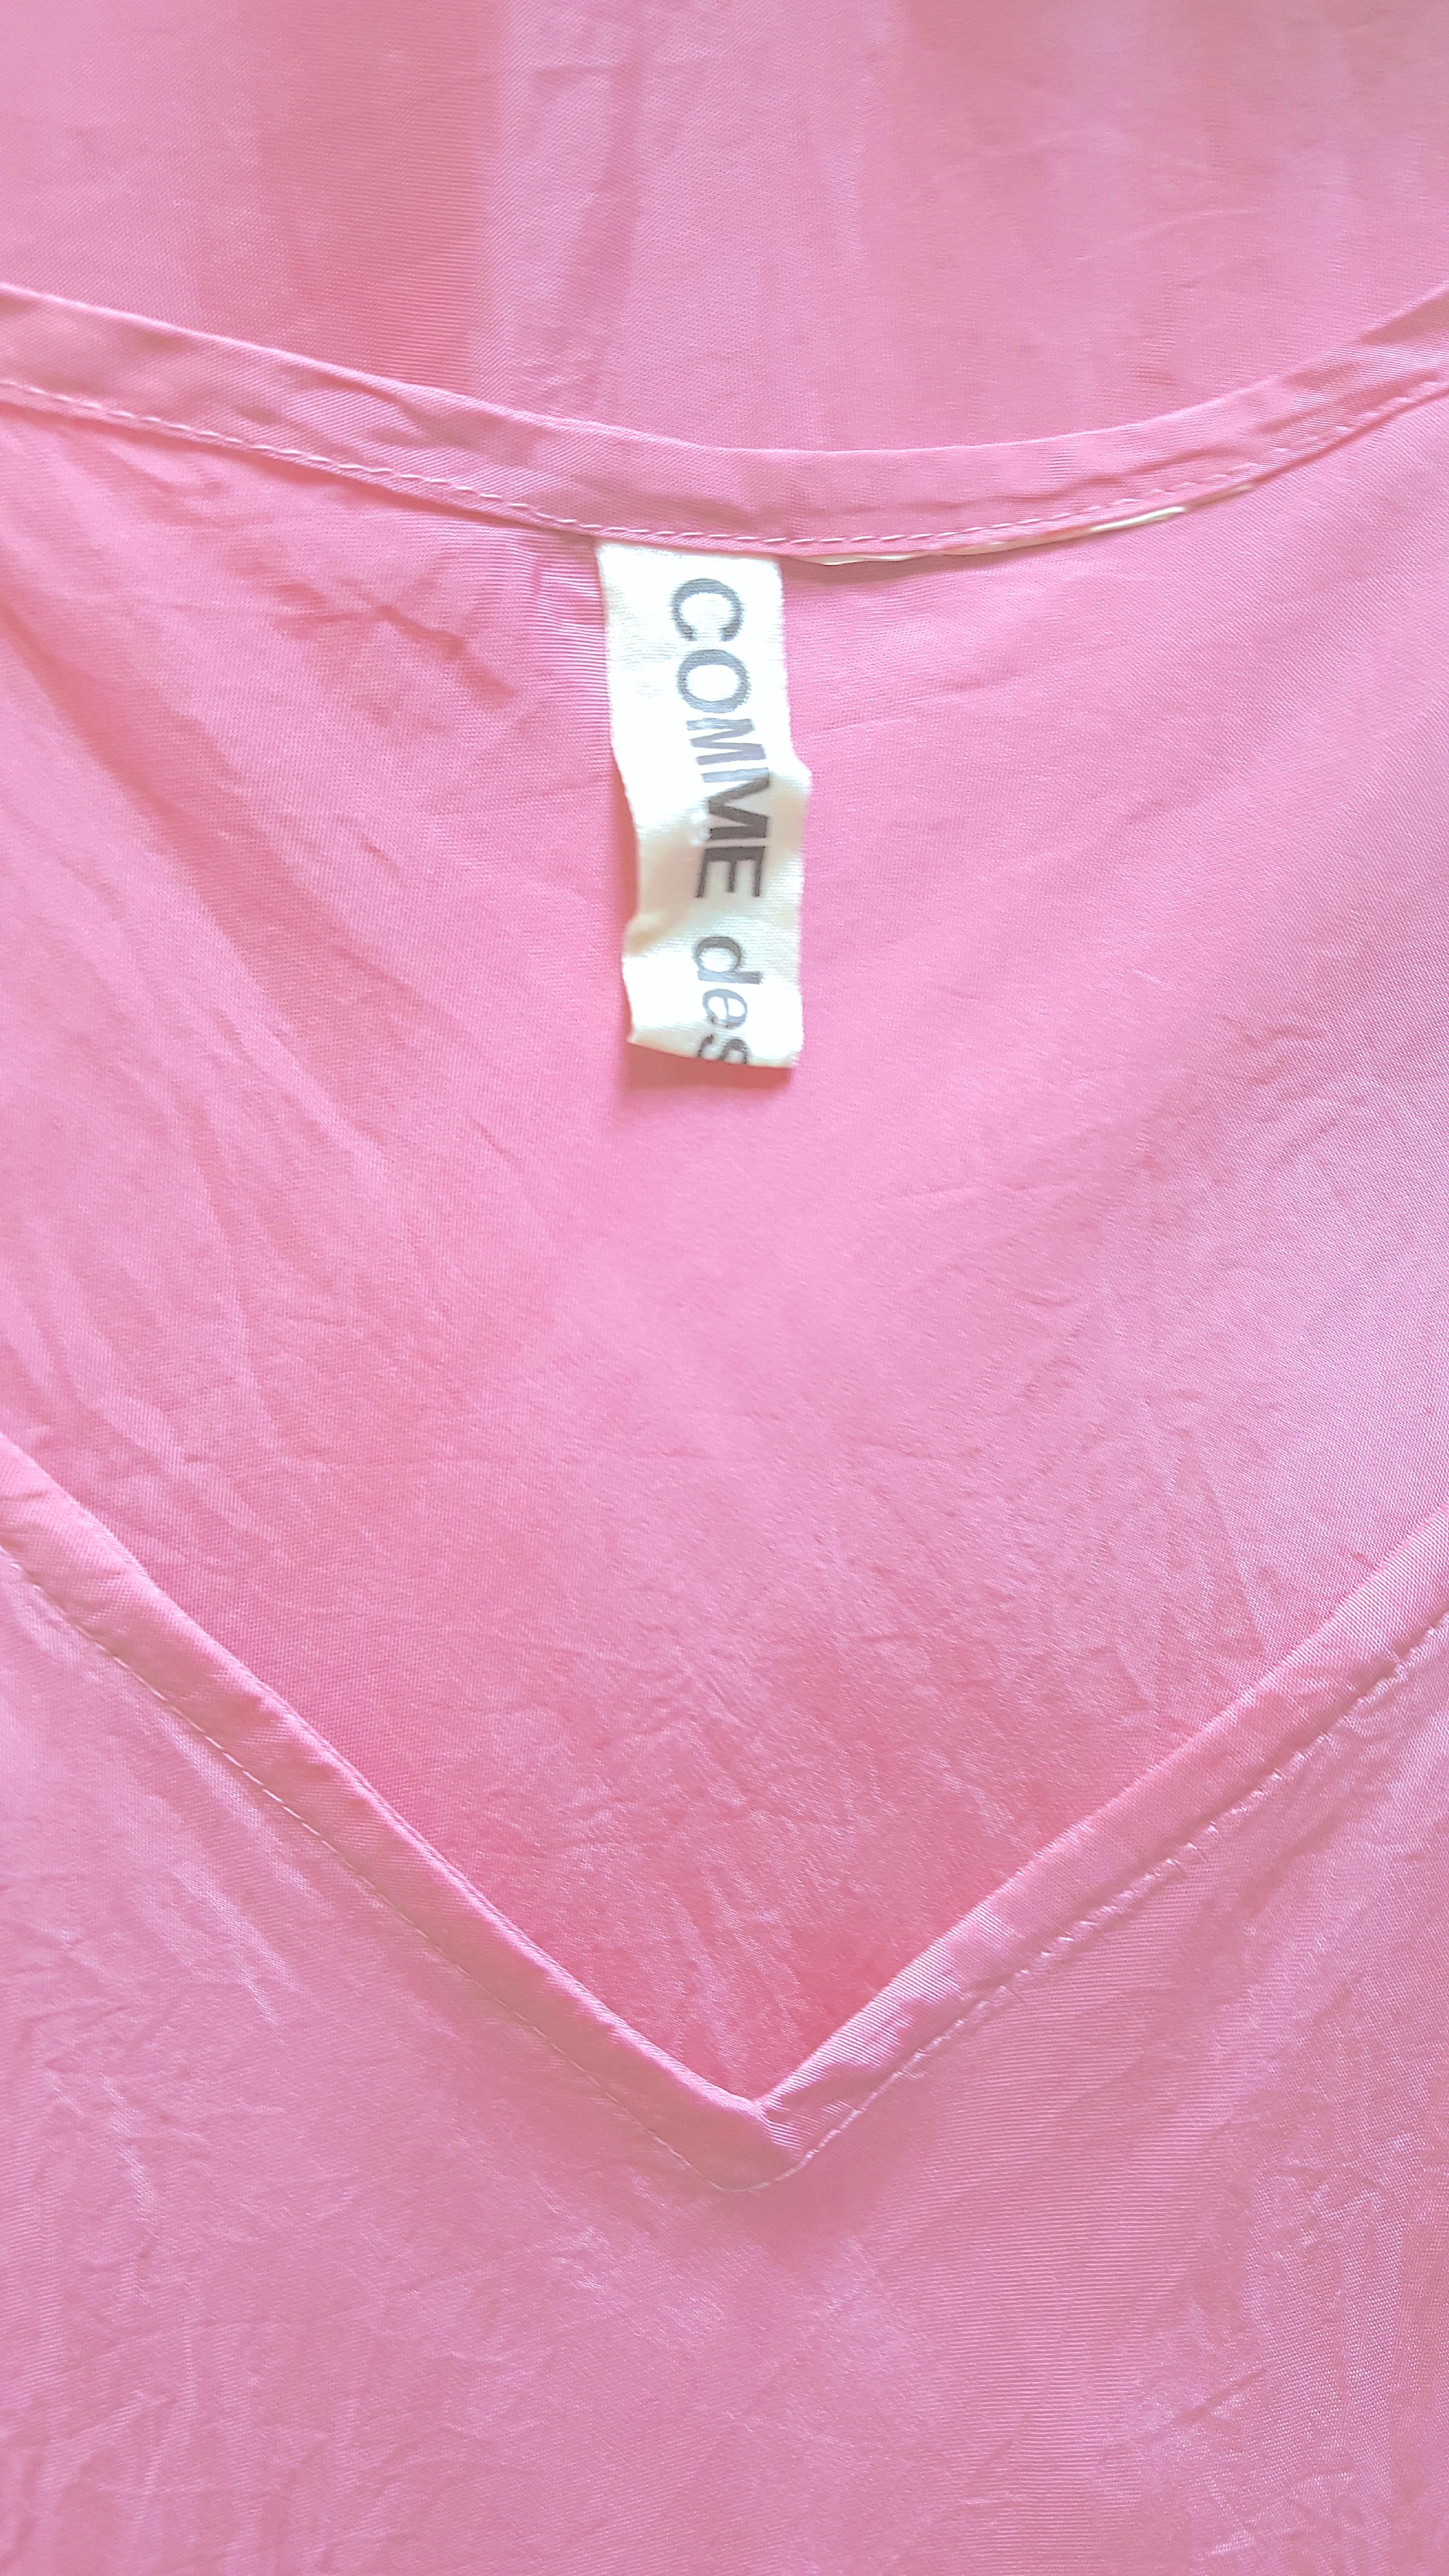 CommeDesGarcons 1999 RunwayLook12 BiasCut TranslucentSatin SalmonPink Maxi Dress In Excellent Condition For Sale In Chicago, IL